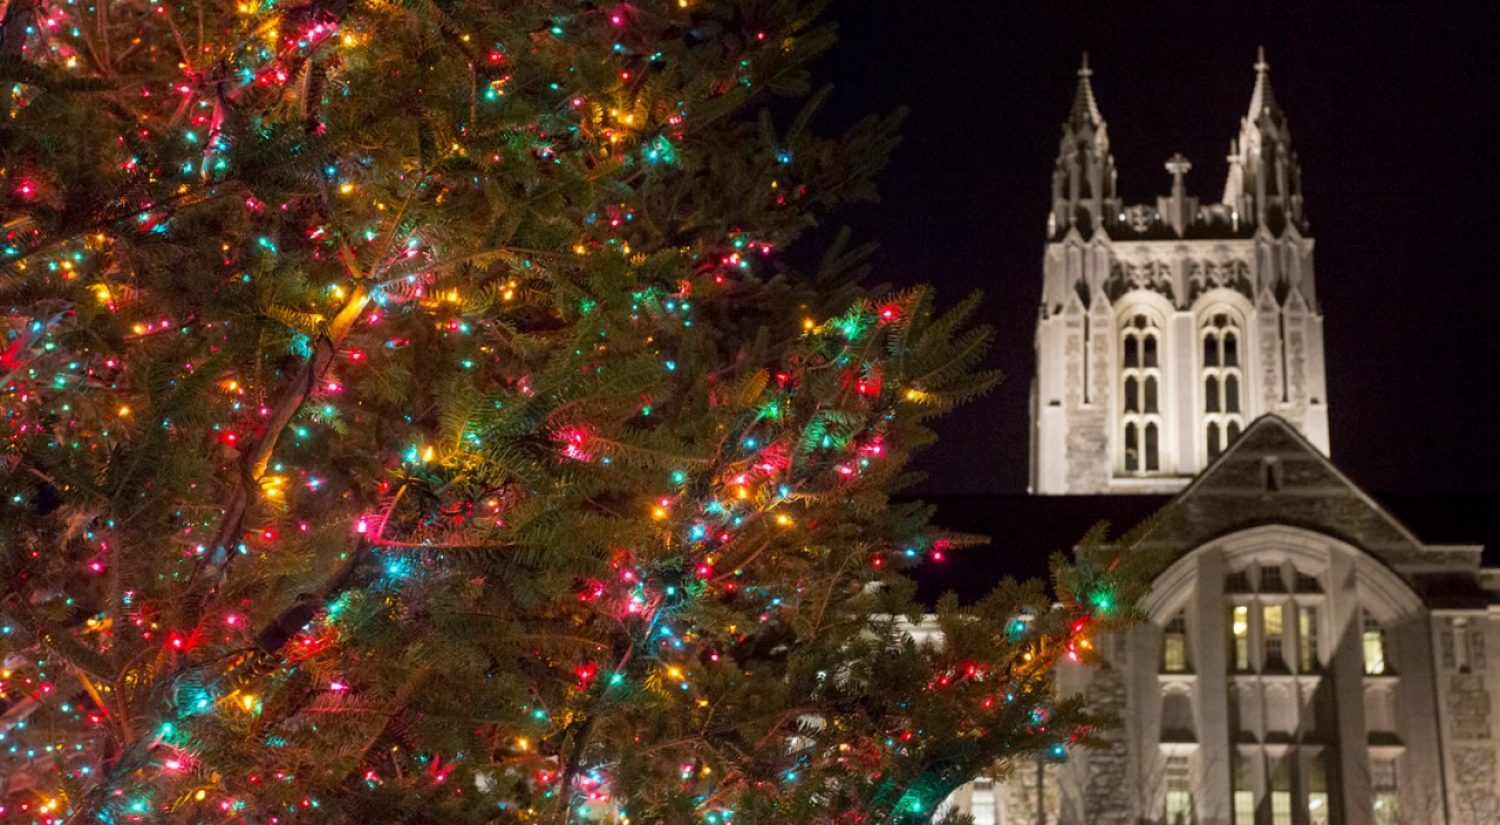 Gasson in lights